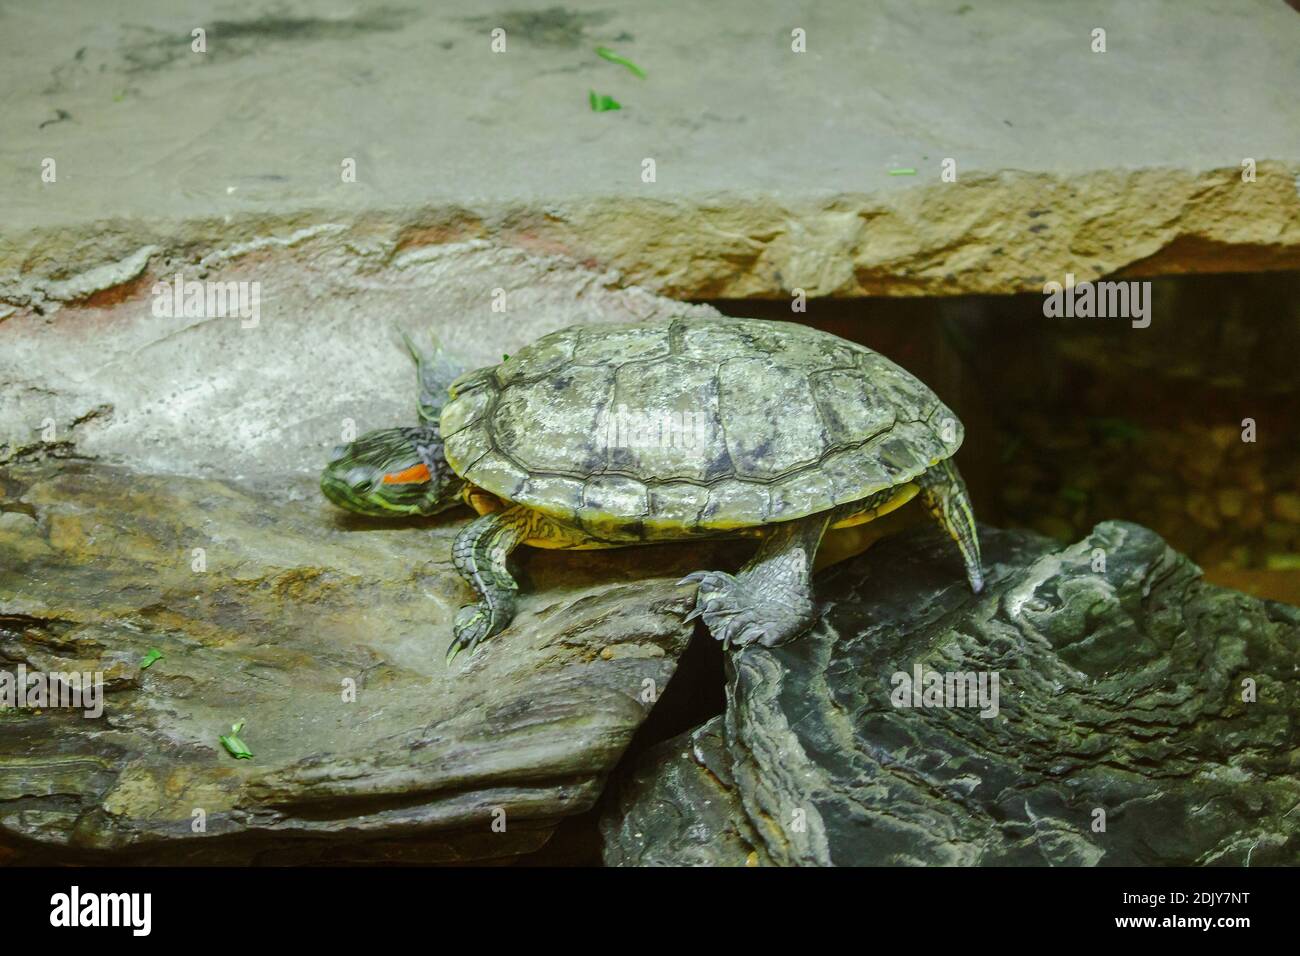 Trachemys Scripta Is On A Rock A Freshwater Turtle Is Native To North America. Stock Photo